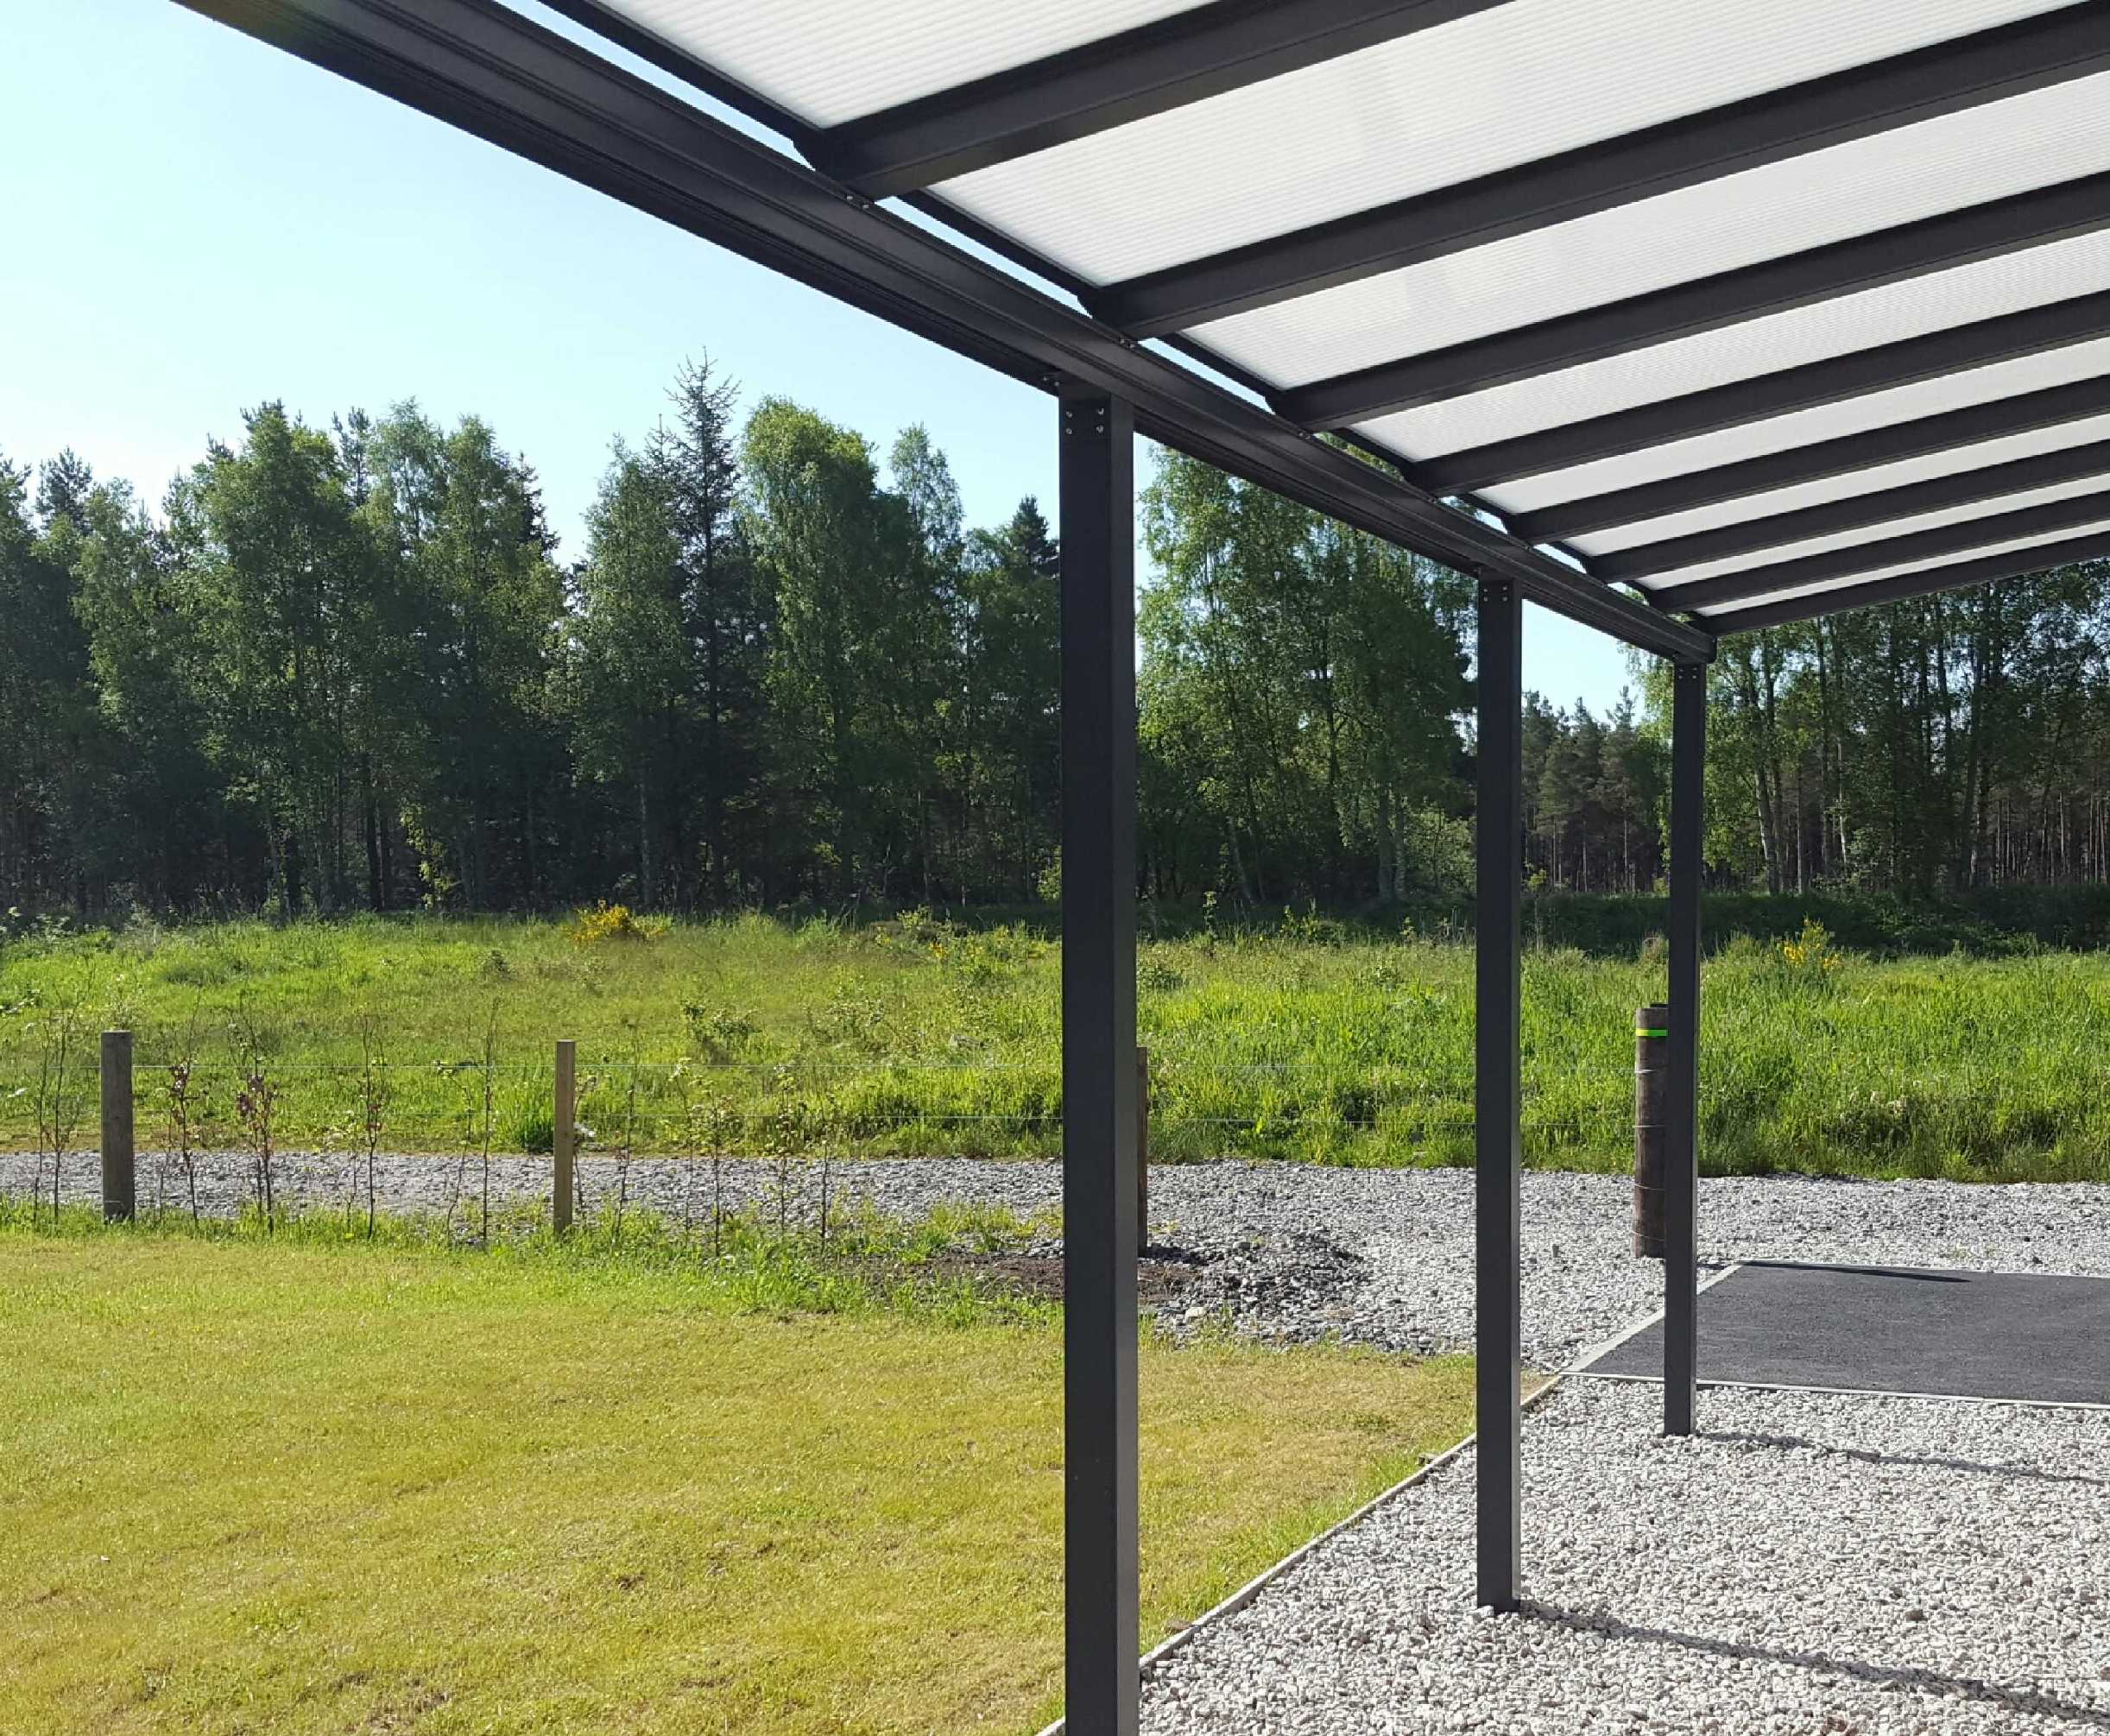 Omega Smart Lean-To Canopy, Anthracite Grey, 6mm Glass Clear Plate Polycarbonate Glazing - 8.4m (W) x 1.5m (P), (4) Supporting Posts